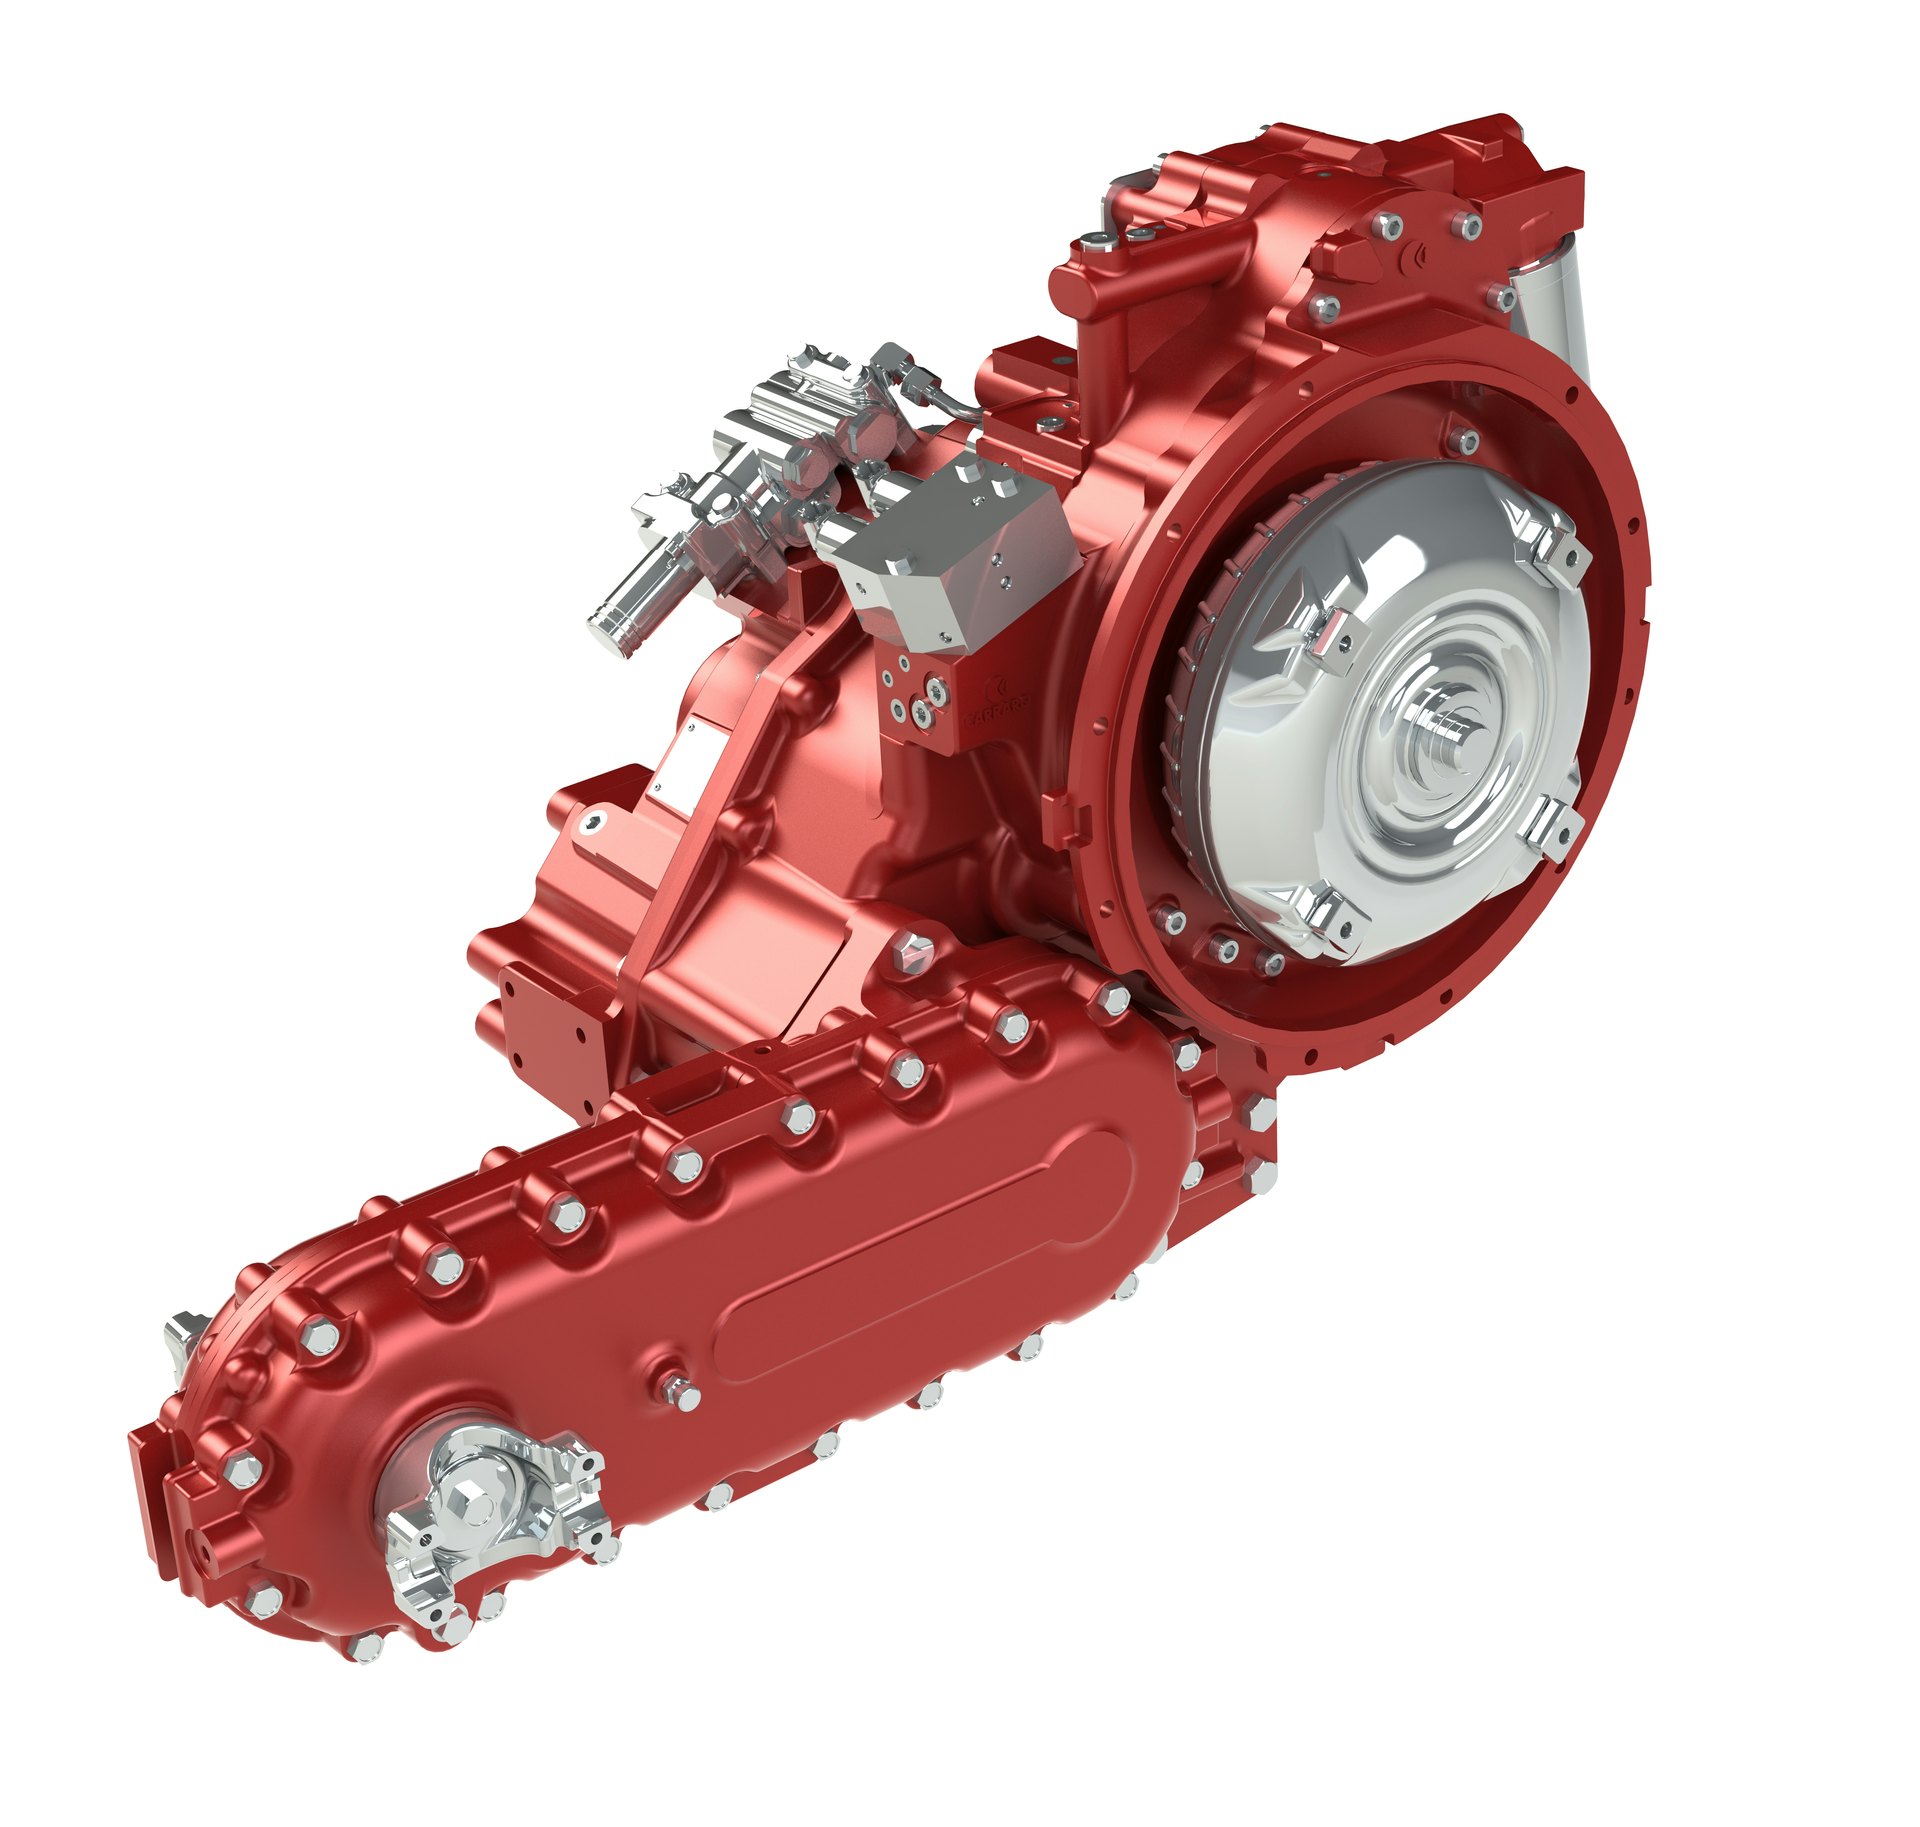 Carraro TCH90 Full Power Shift Transmissions From: Carraro Group 